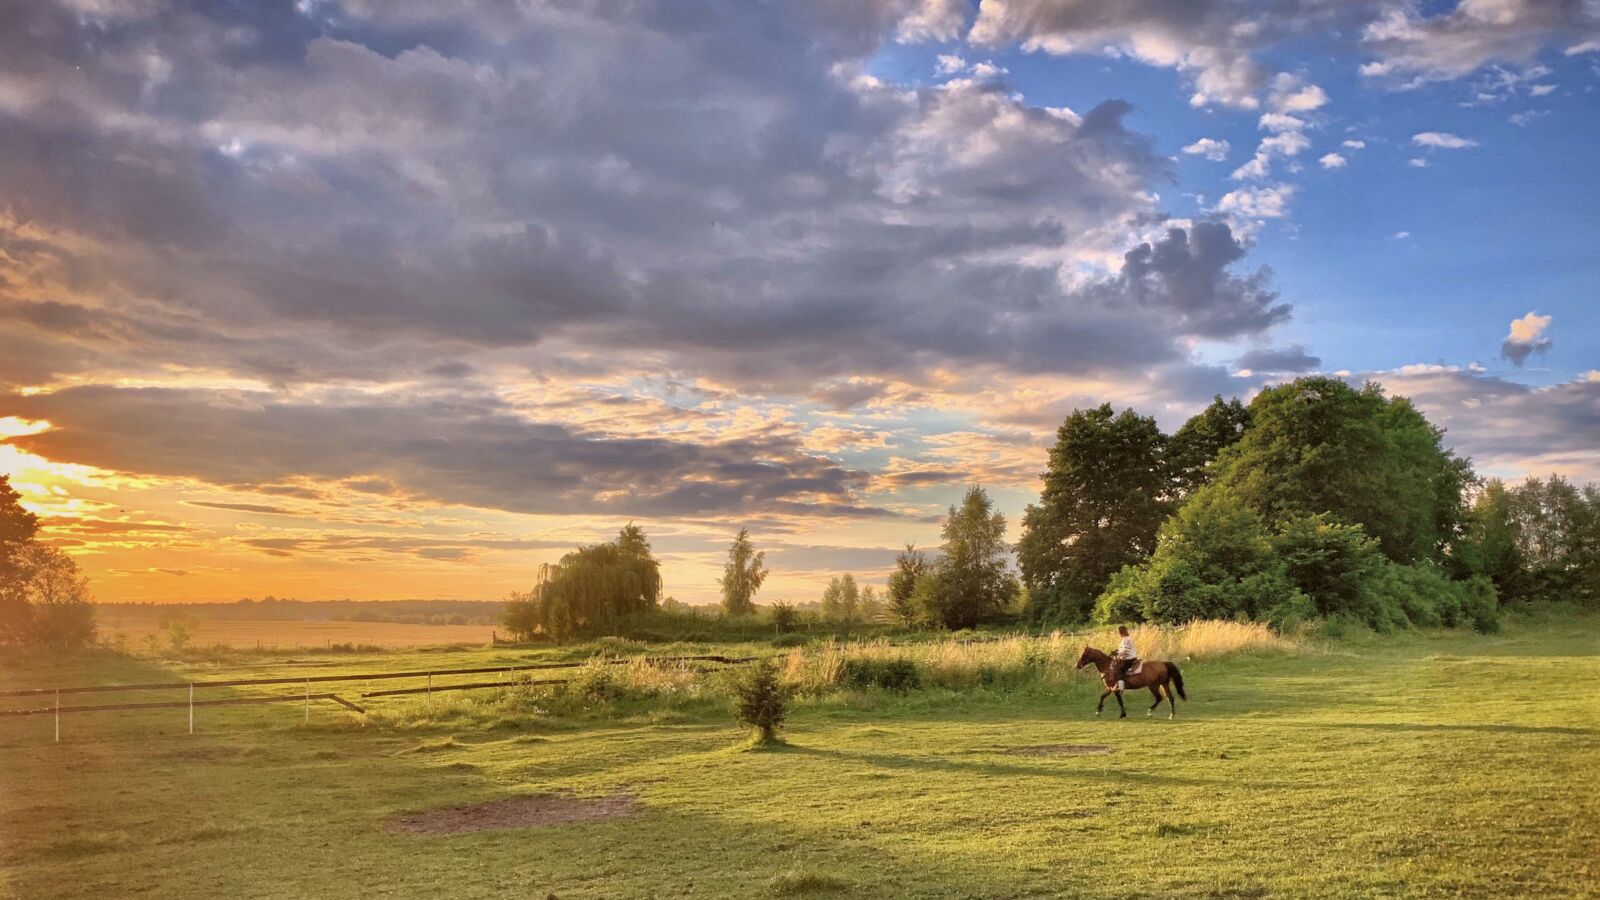 Apple iPhone XR sample photo. Meadow, the horse, animals photography